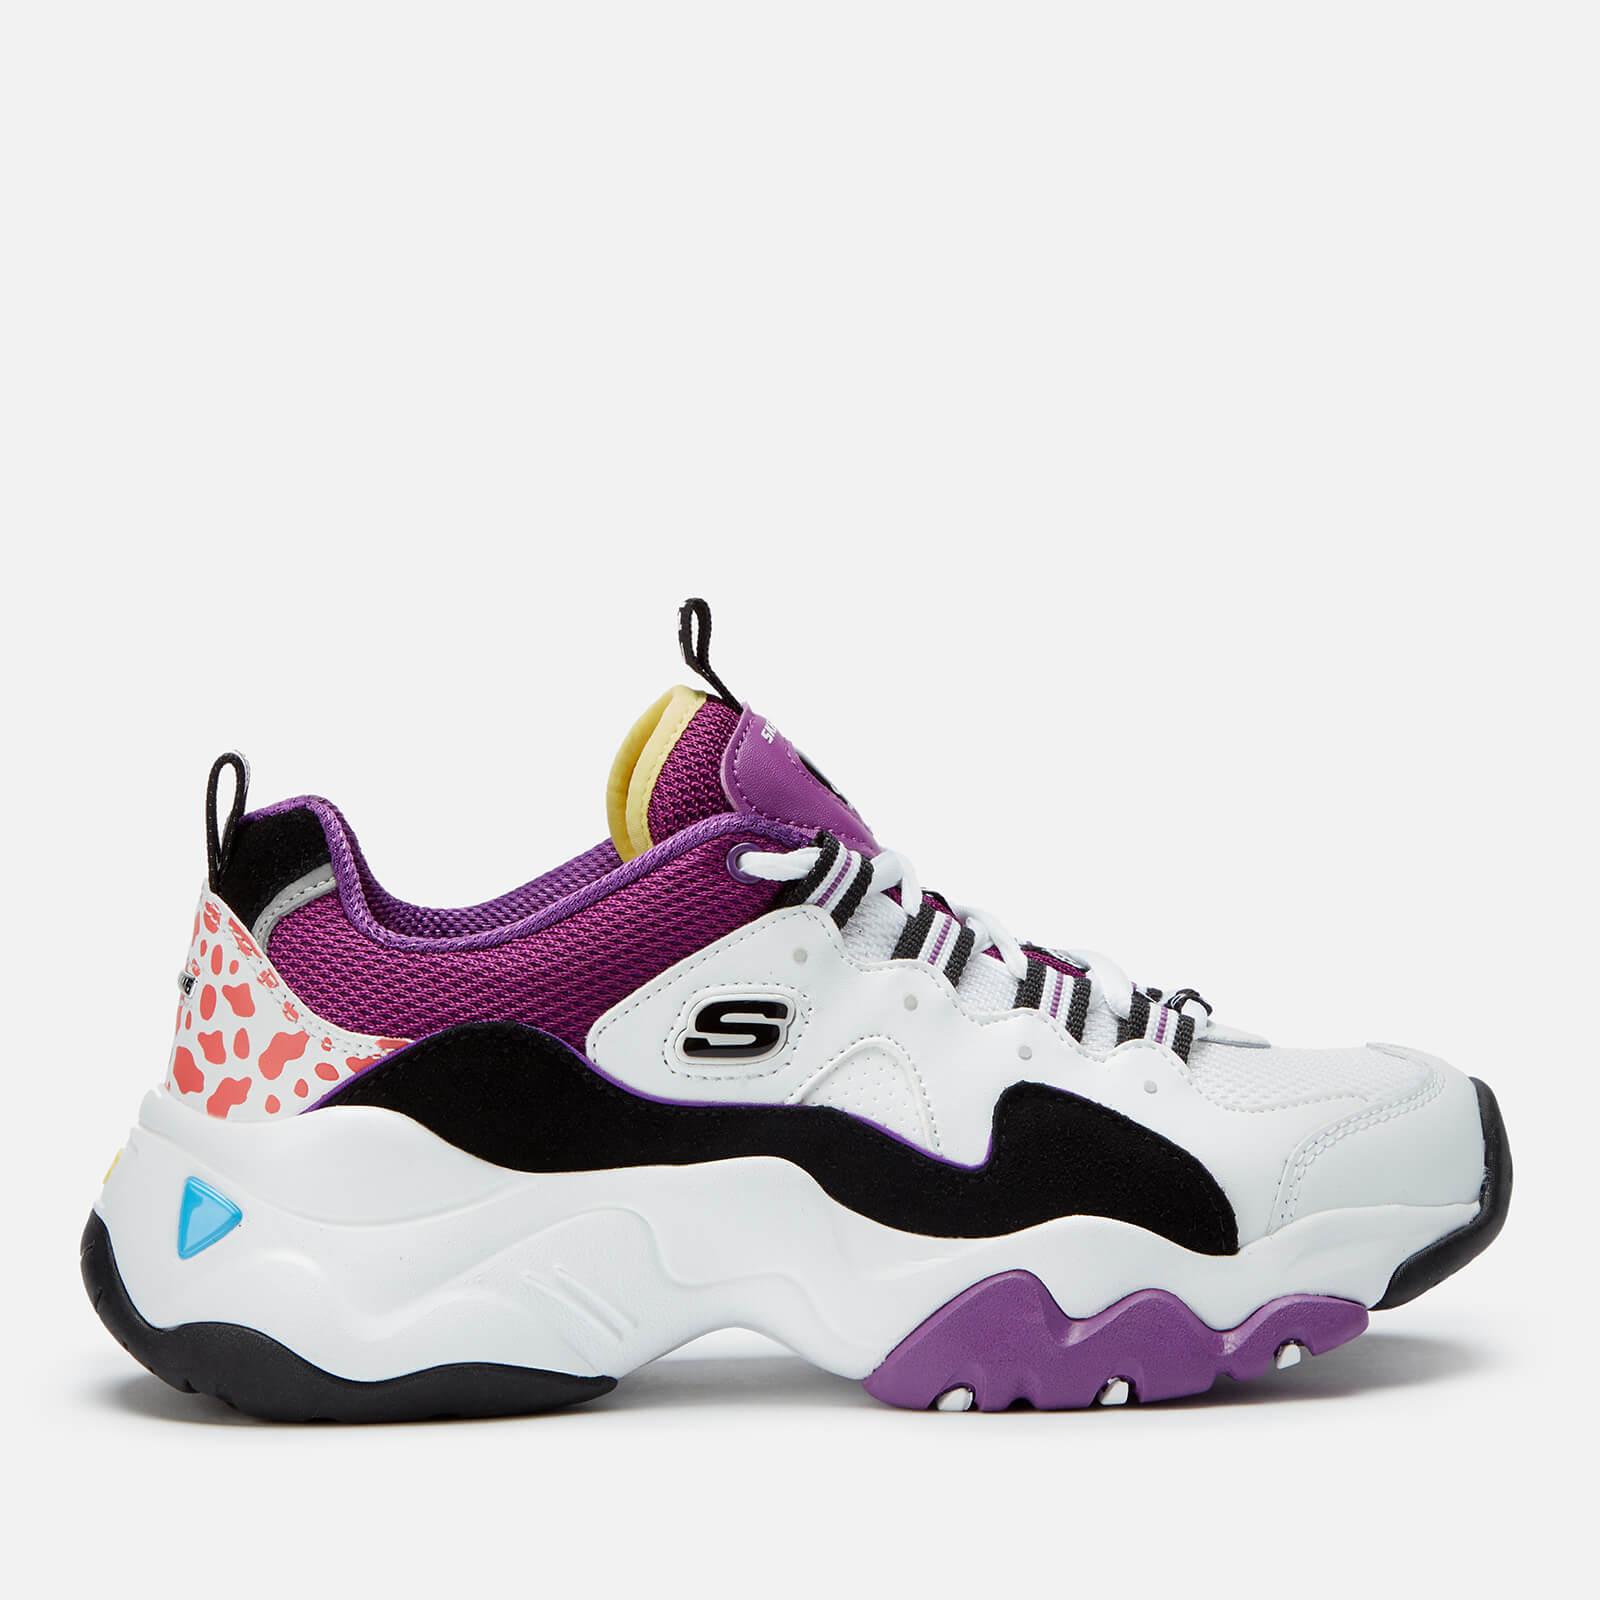 Skechers Leather D'lites 3.0 Sea And Islands Trainers in White/Purple  (Purple) - Lyst